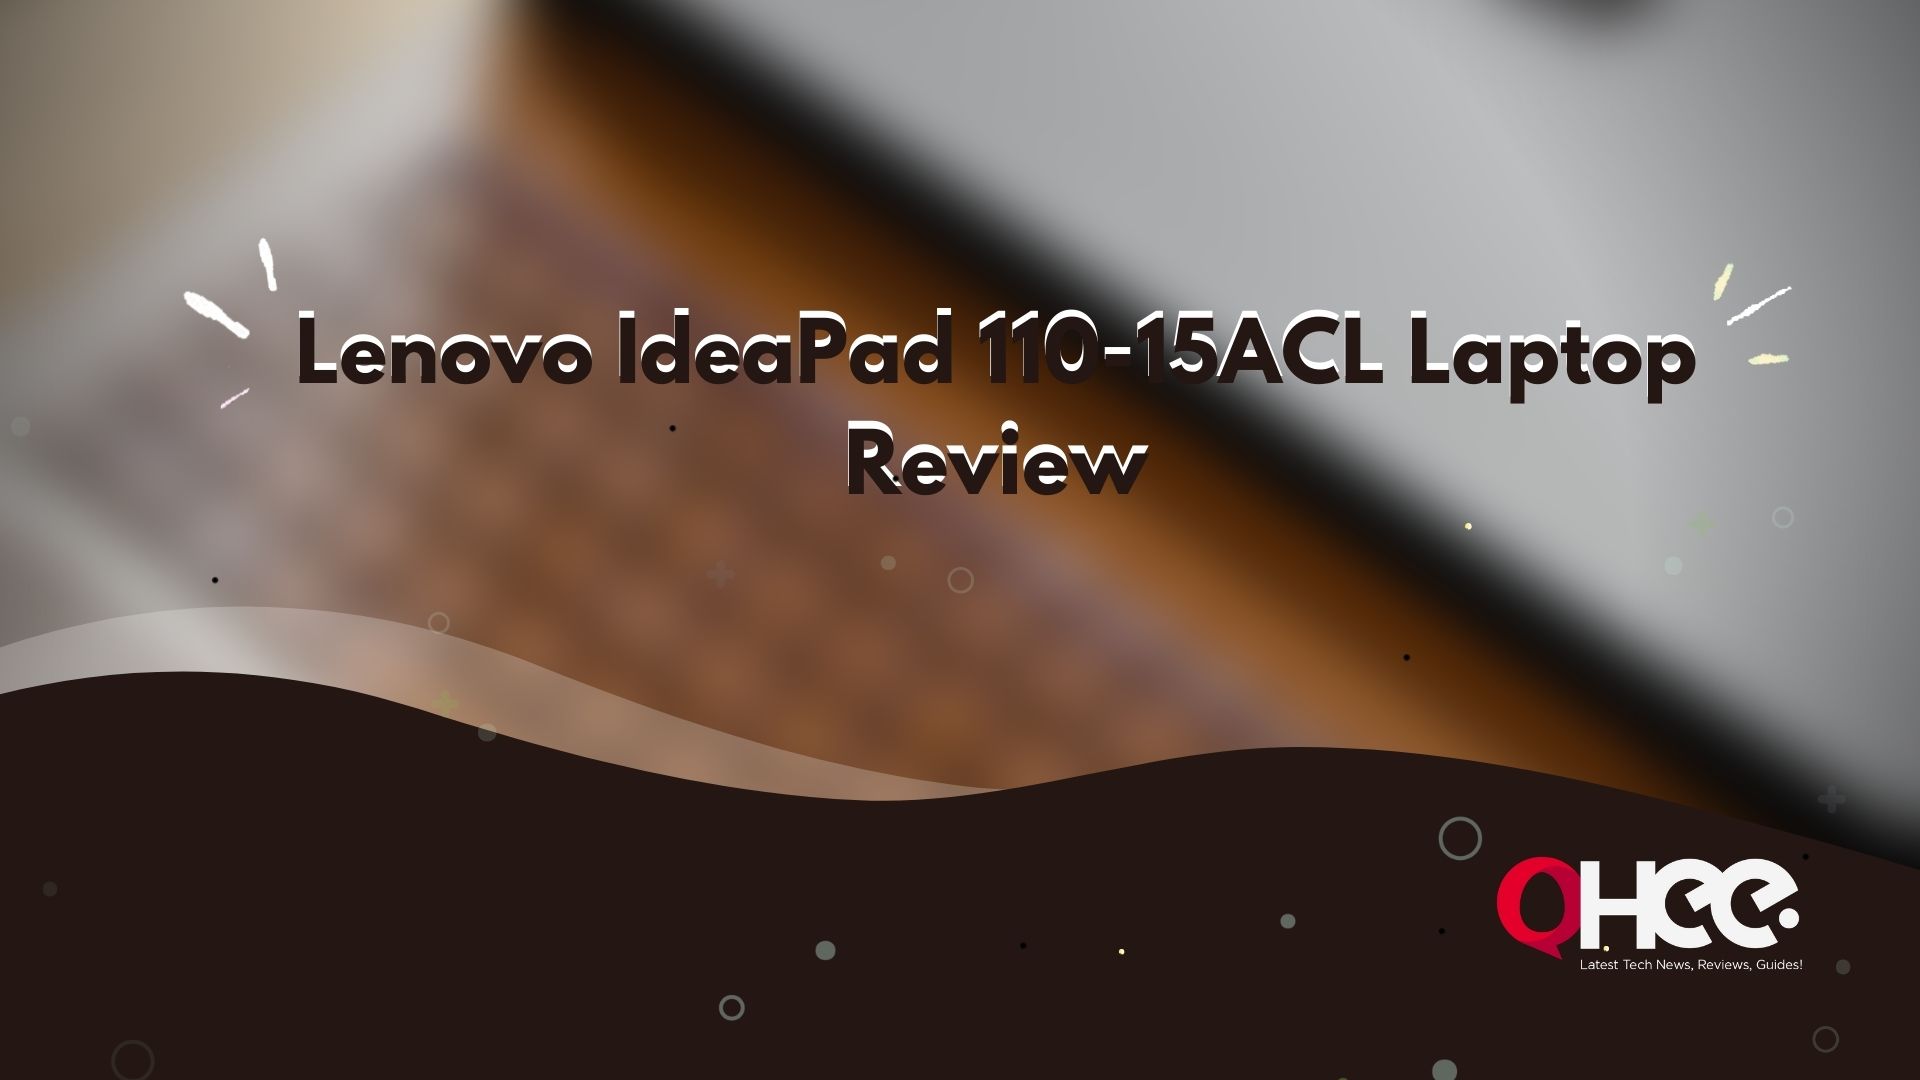 Lenovo IdeaPad 110-15ACL Laptop Review